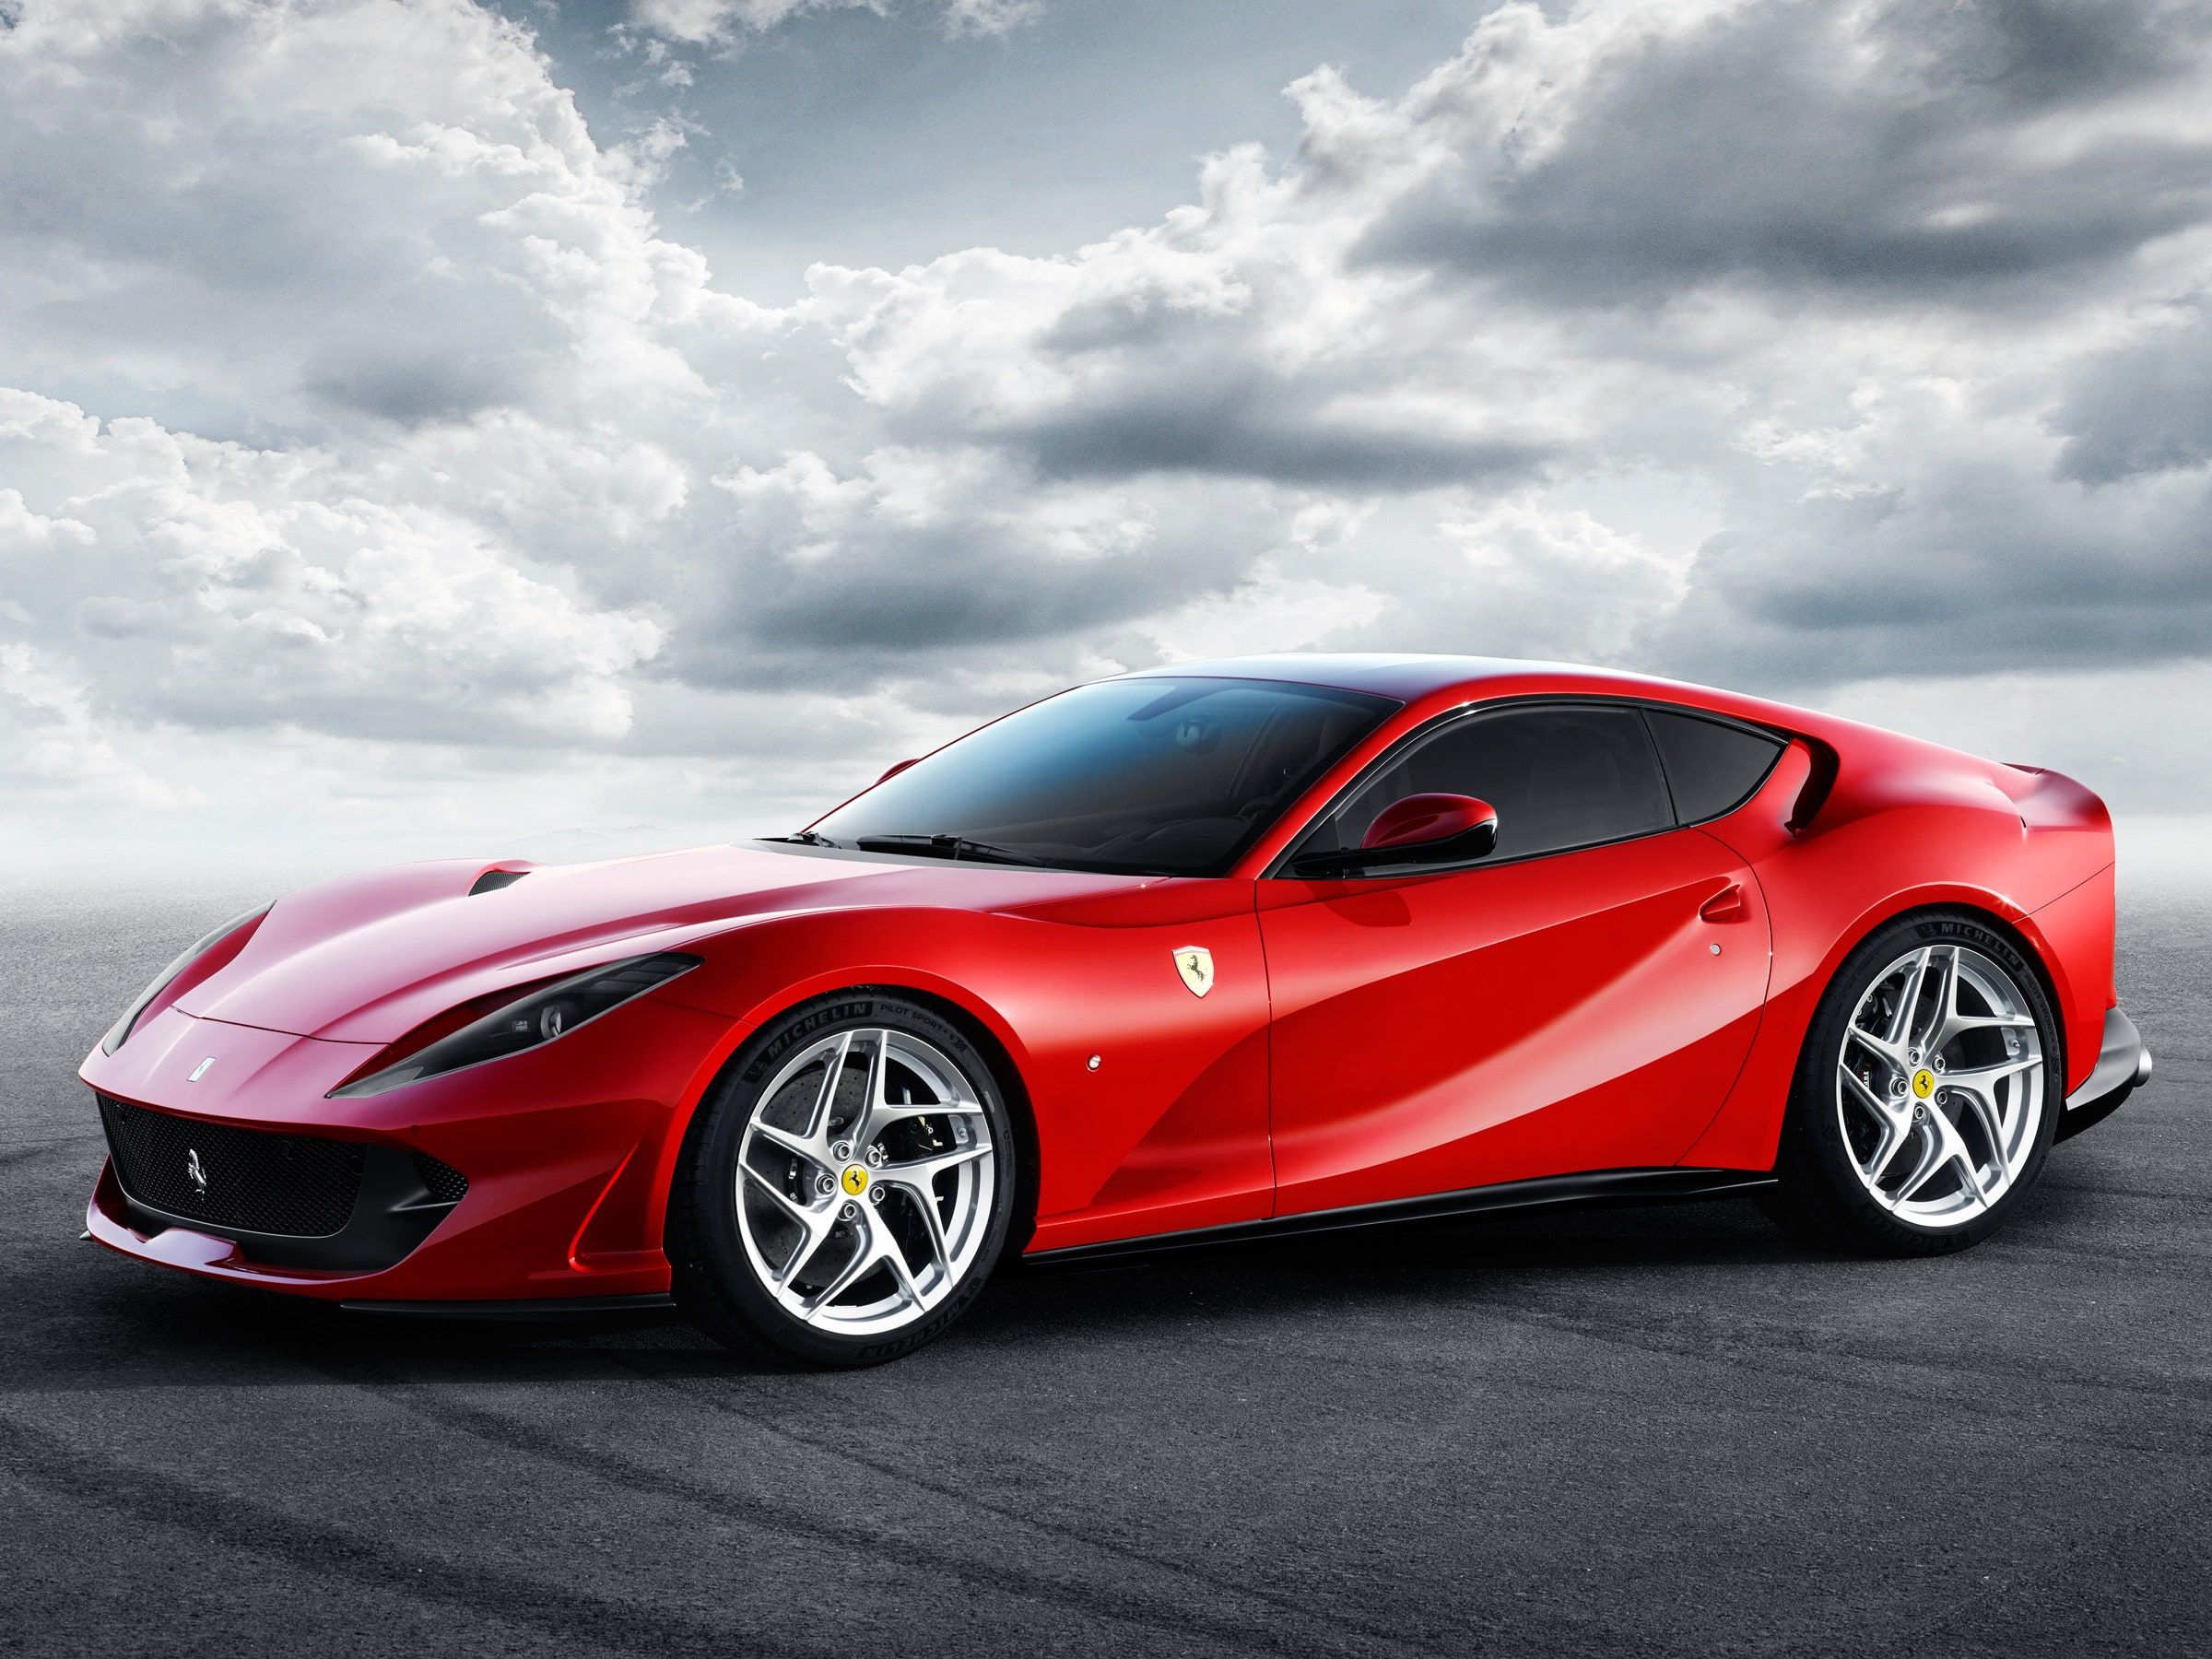 Ferrari's 812 Superfast Is Its Fastest, Most Powerful Car Ever | WIRED